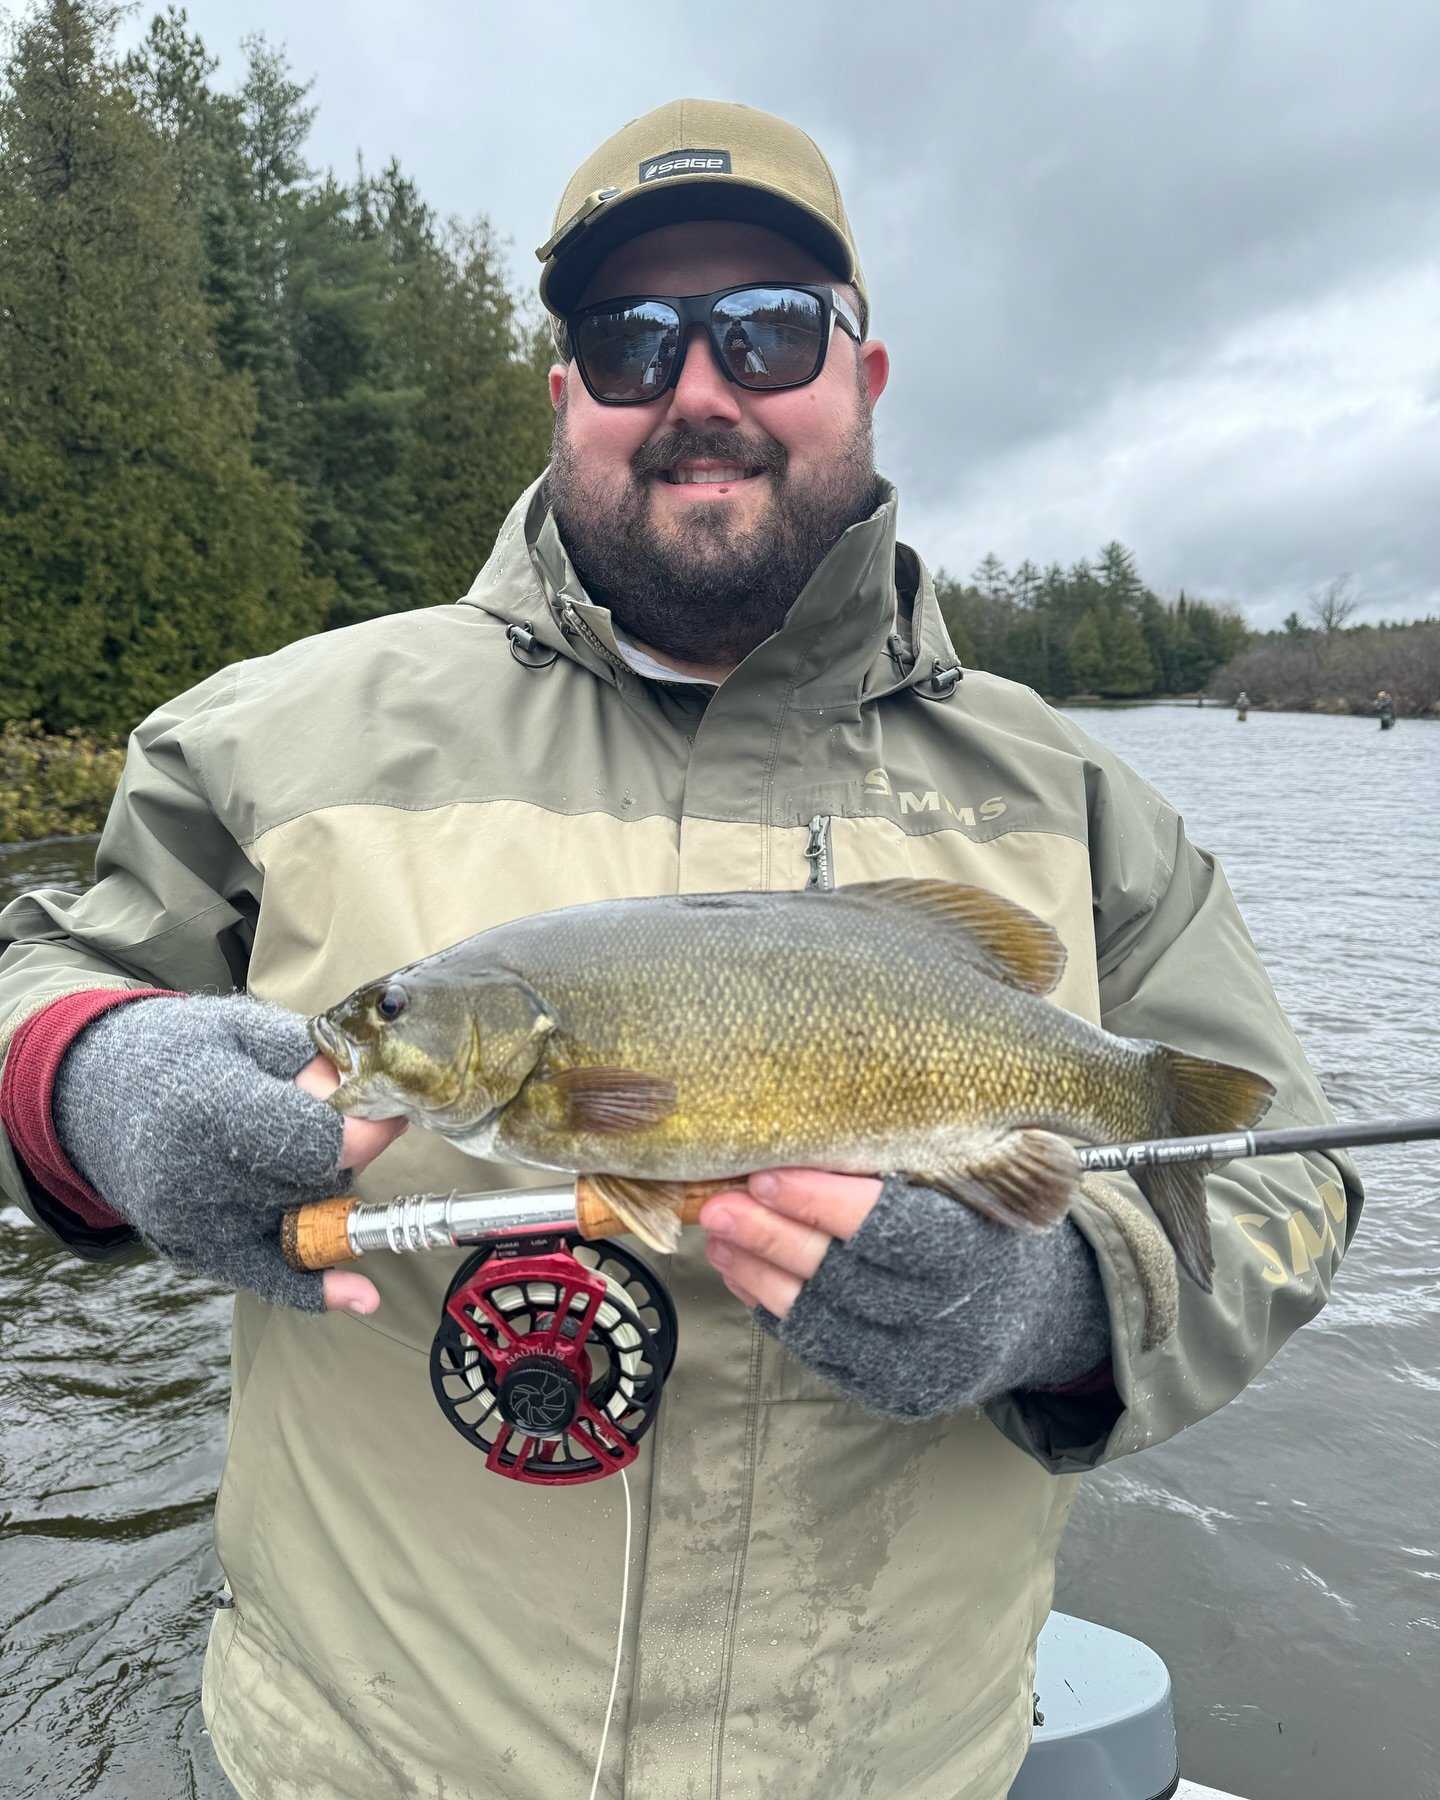 Putting the Berend XF 8 weight to work on small mouth never disappoints. 
www.nativerodco.com
.
.
.
#nativerodco #makeeverycastcount #flyfishmichigan #michiganflyfishing #smallmouthonthefly #bassonthefly #flyfishing #flyfishingforbass #getoutside #mo